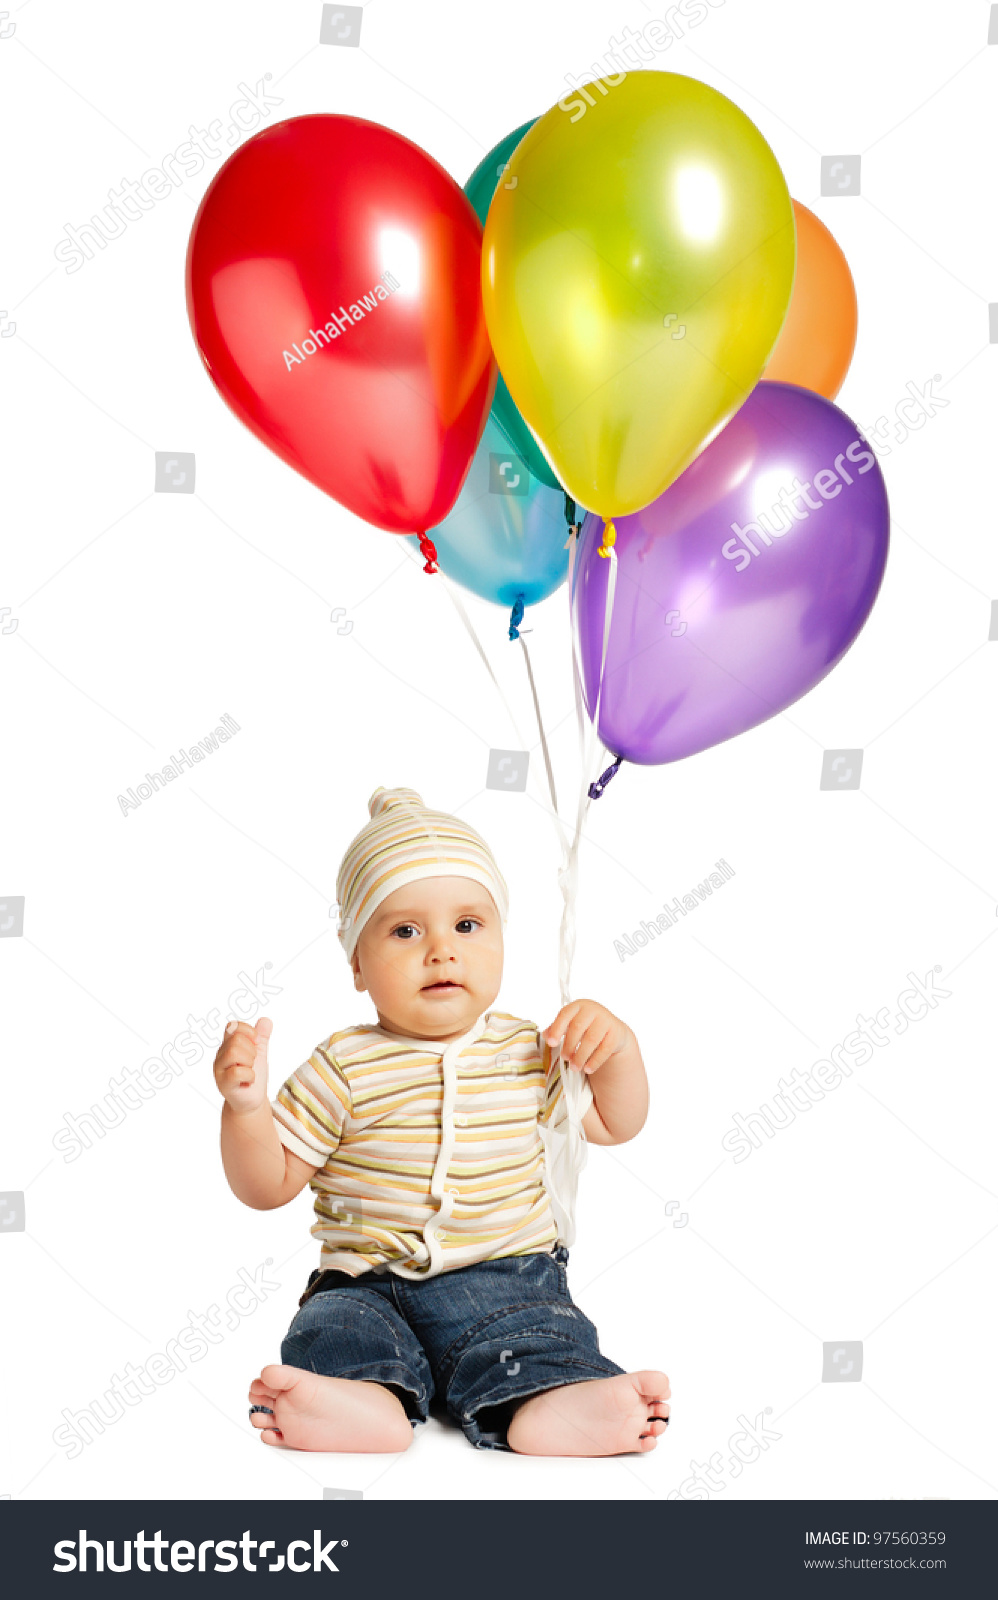 Little Boy With Balloons Stock Photo 97560359 : Shutterstock